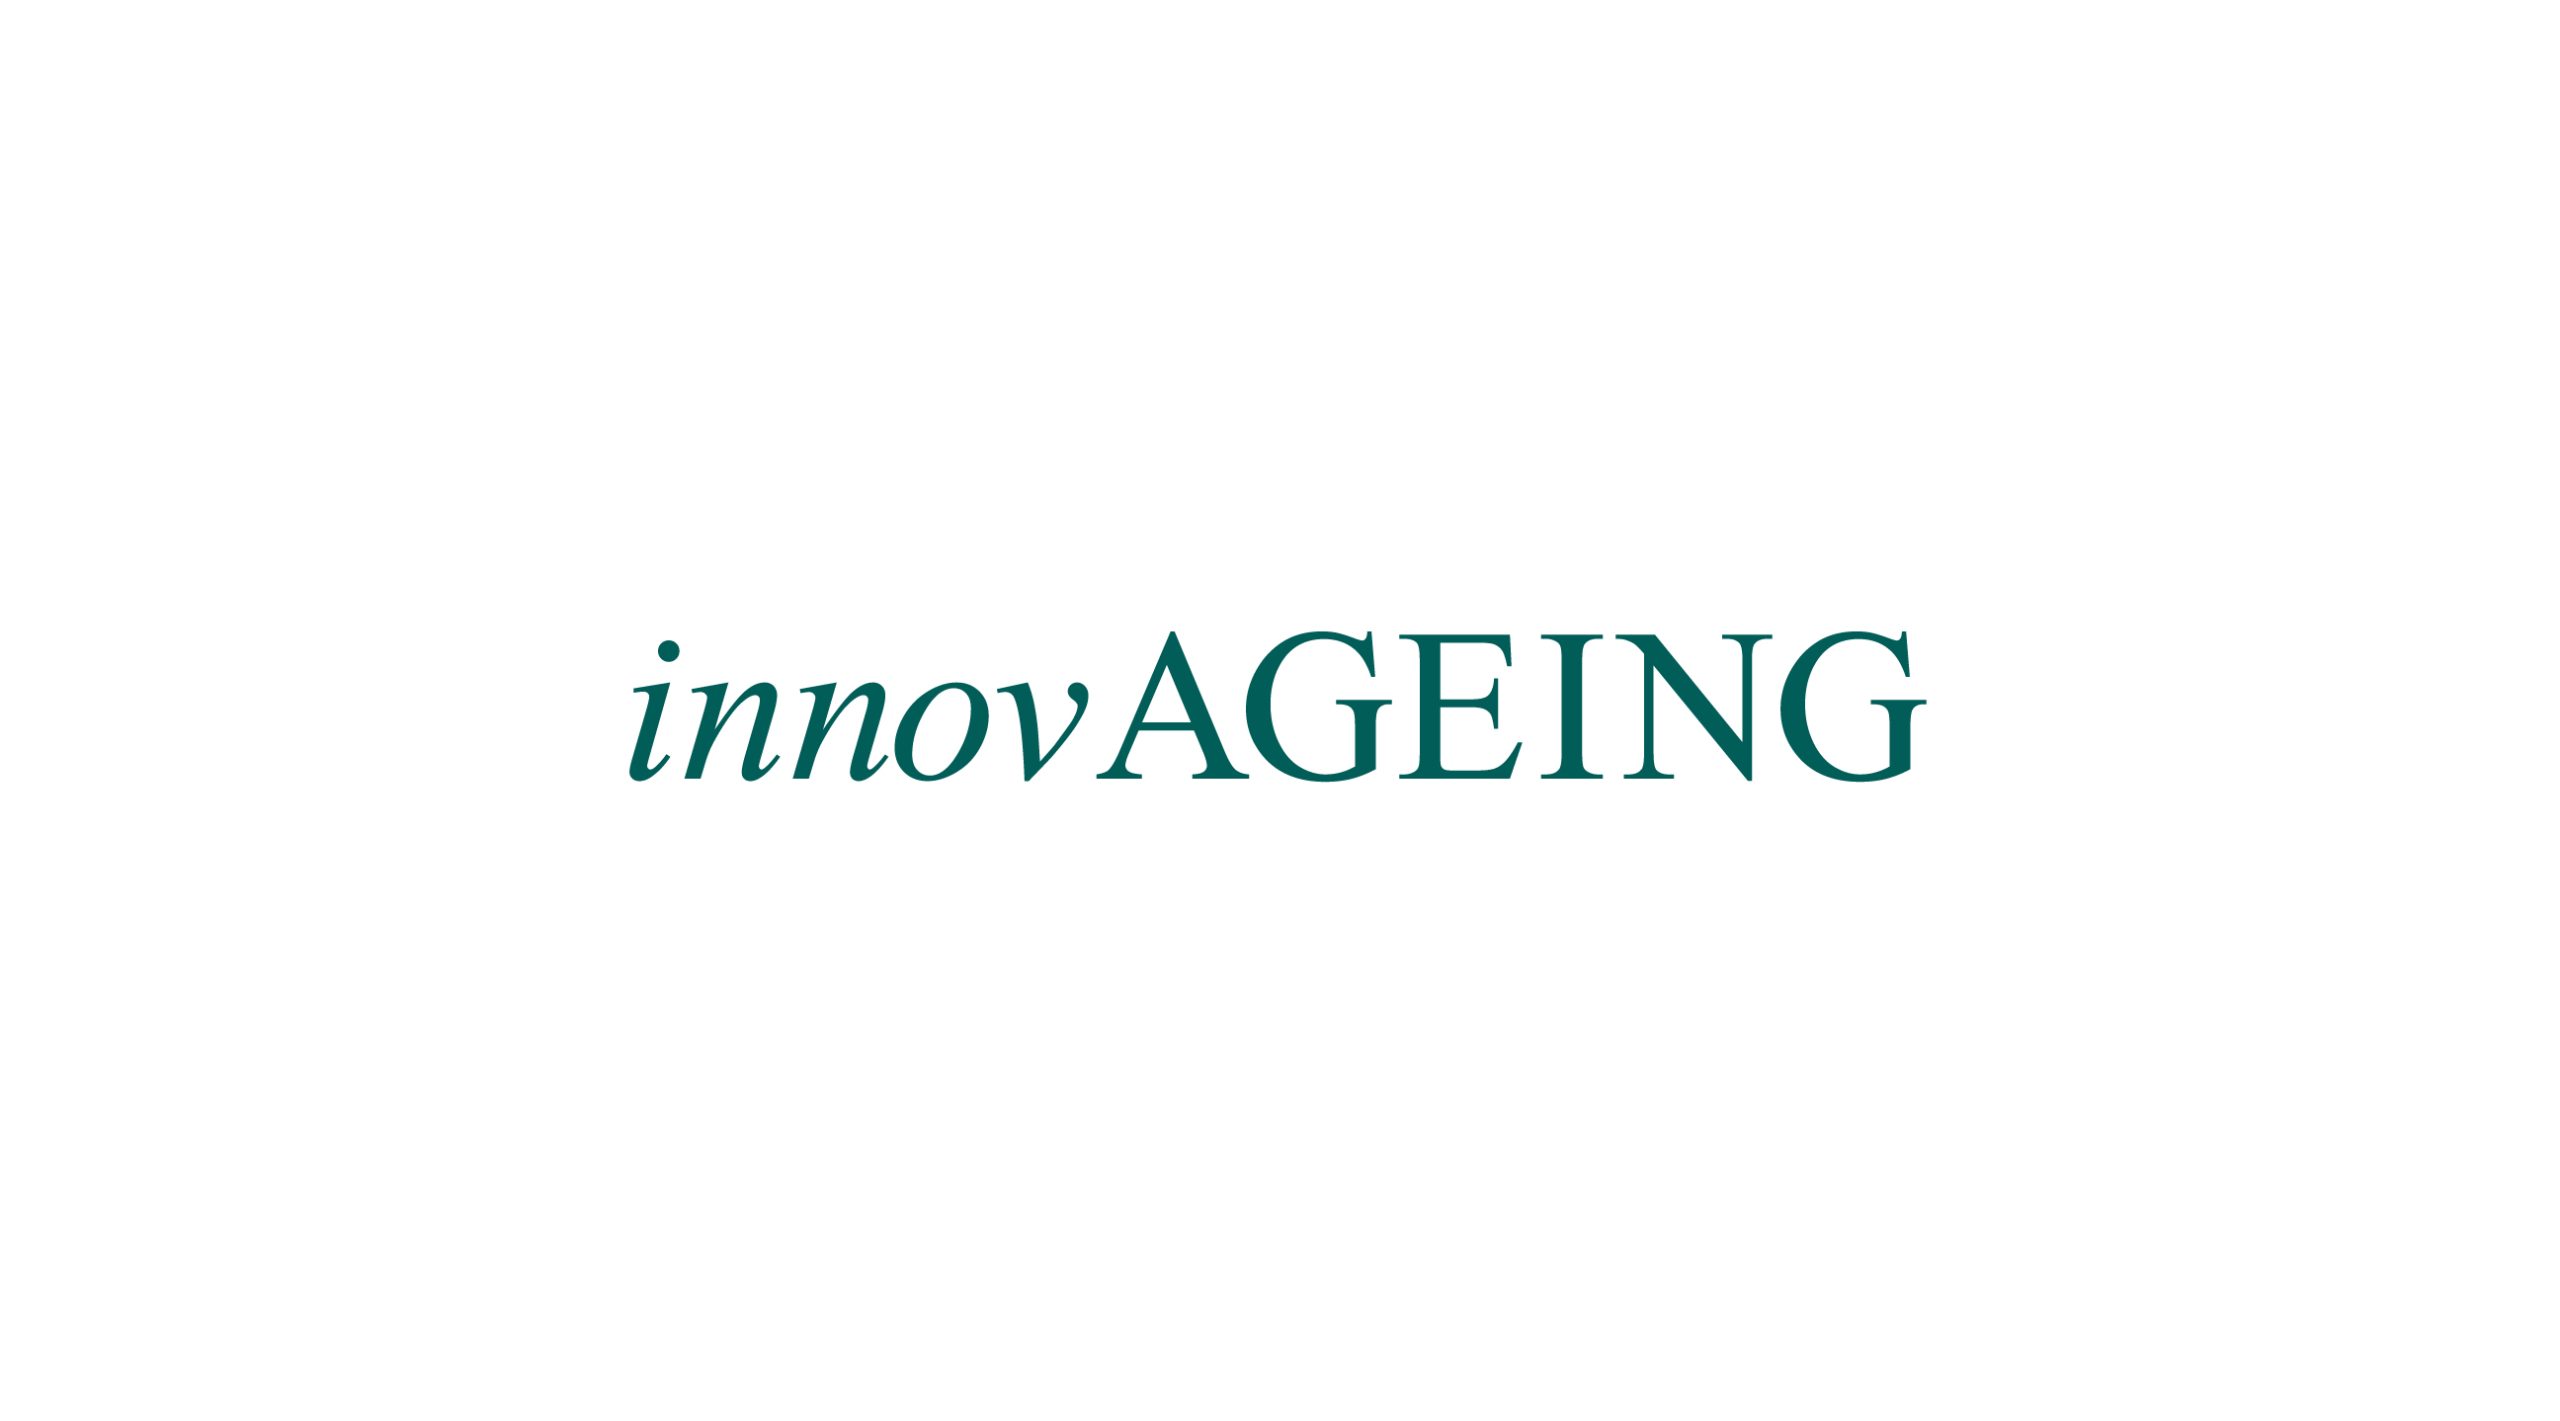 2022 InnovAGEING National Awards Winners